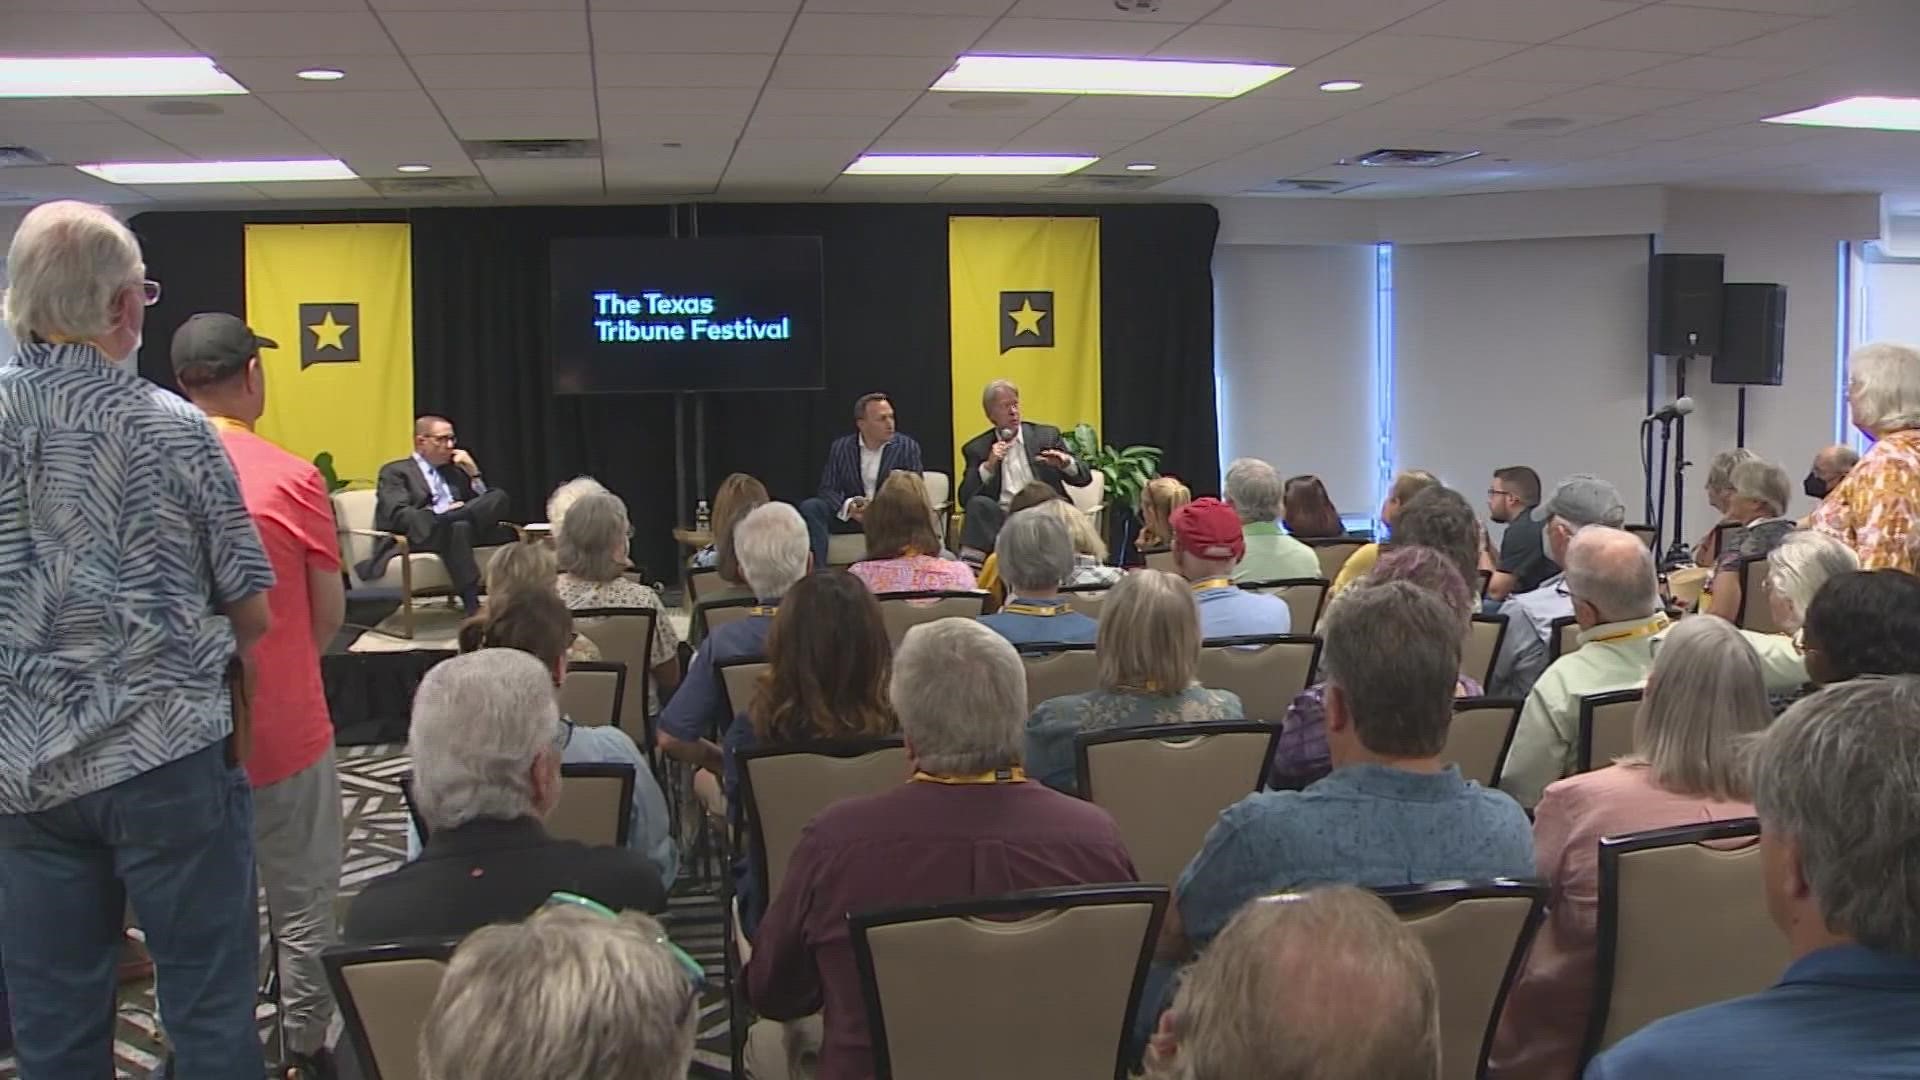 The Texas Tribune Festival gathers local, state and national news and political leaders for conversations on a wide range of issues that impact all Texans.